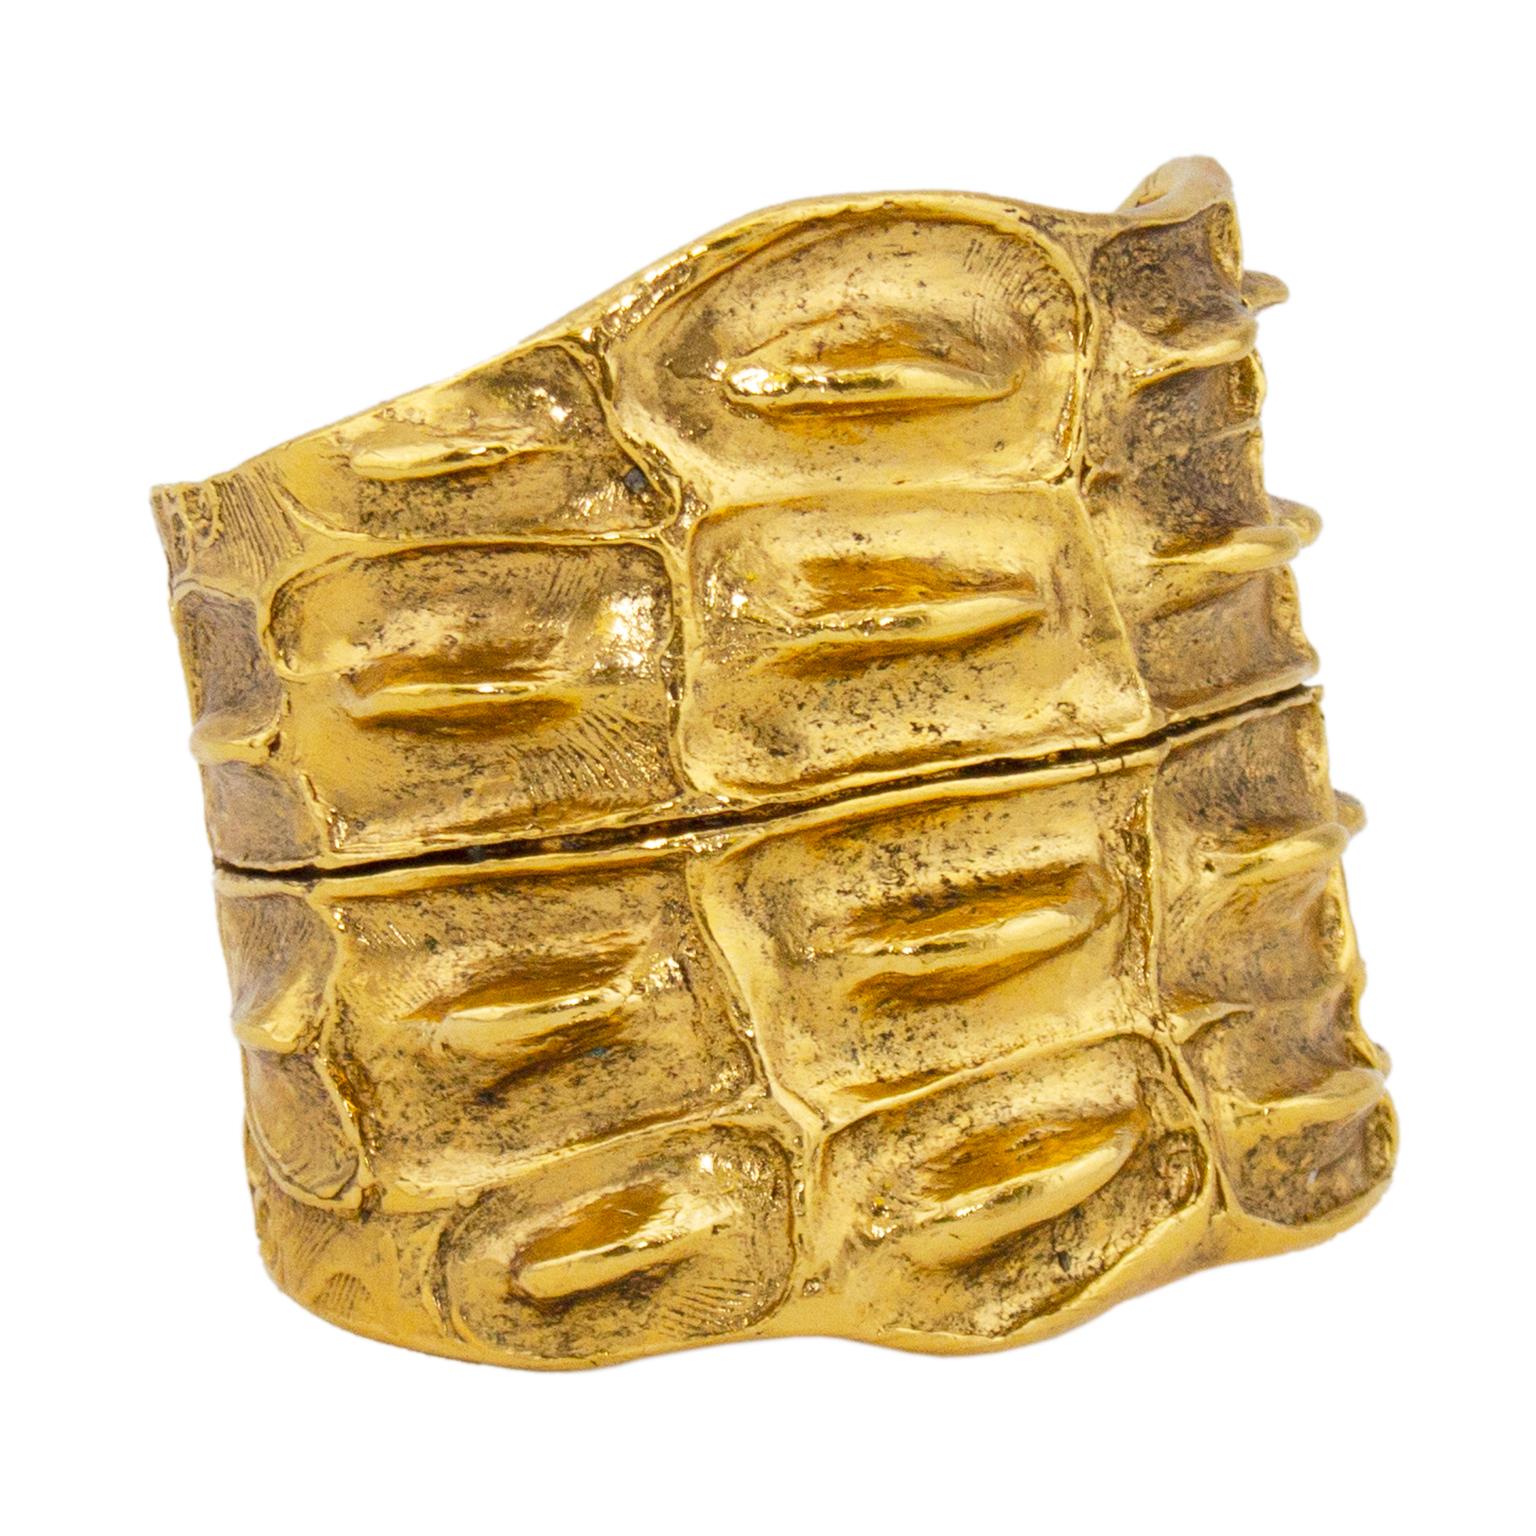 1970s Yves Saint Laurent large gold tone statement cuff. Metal is molded to look and feel like alligator skin. Abstract and asymmetrical, giving it a very natural look. Metal is slightly malleable so it can be opened a little bit to get on wrist and